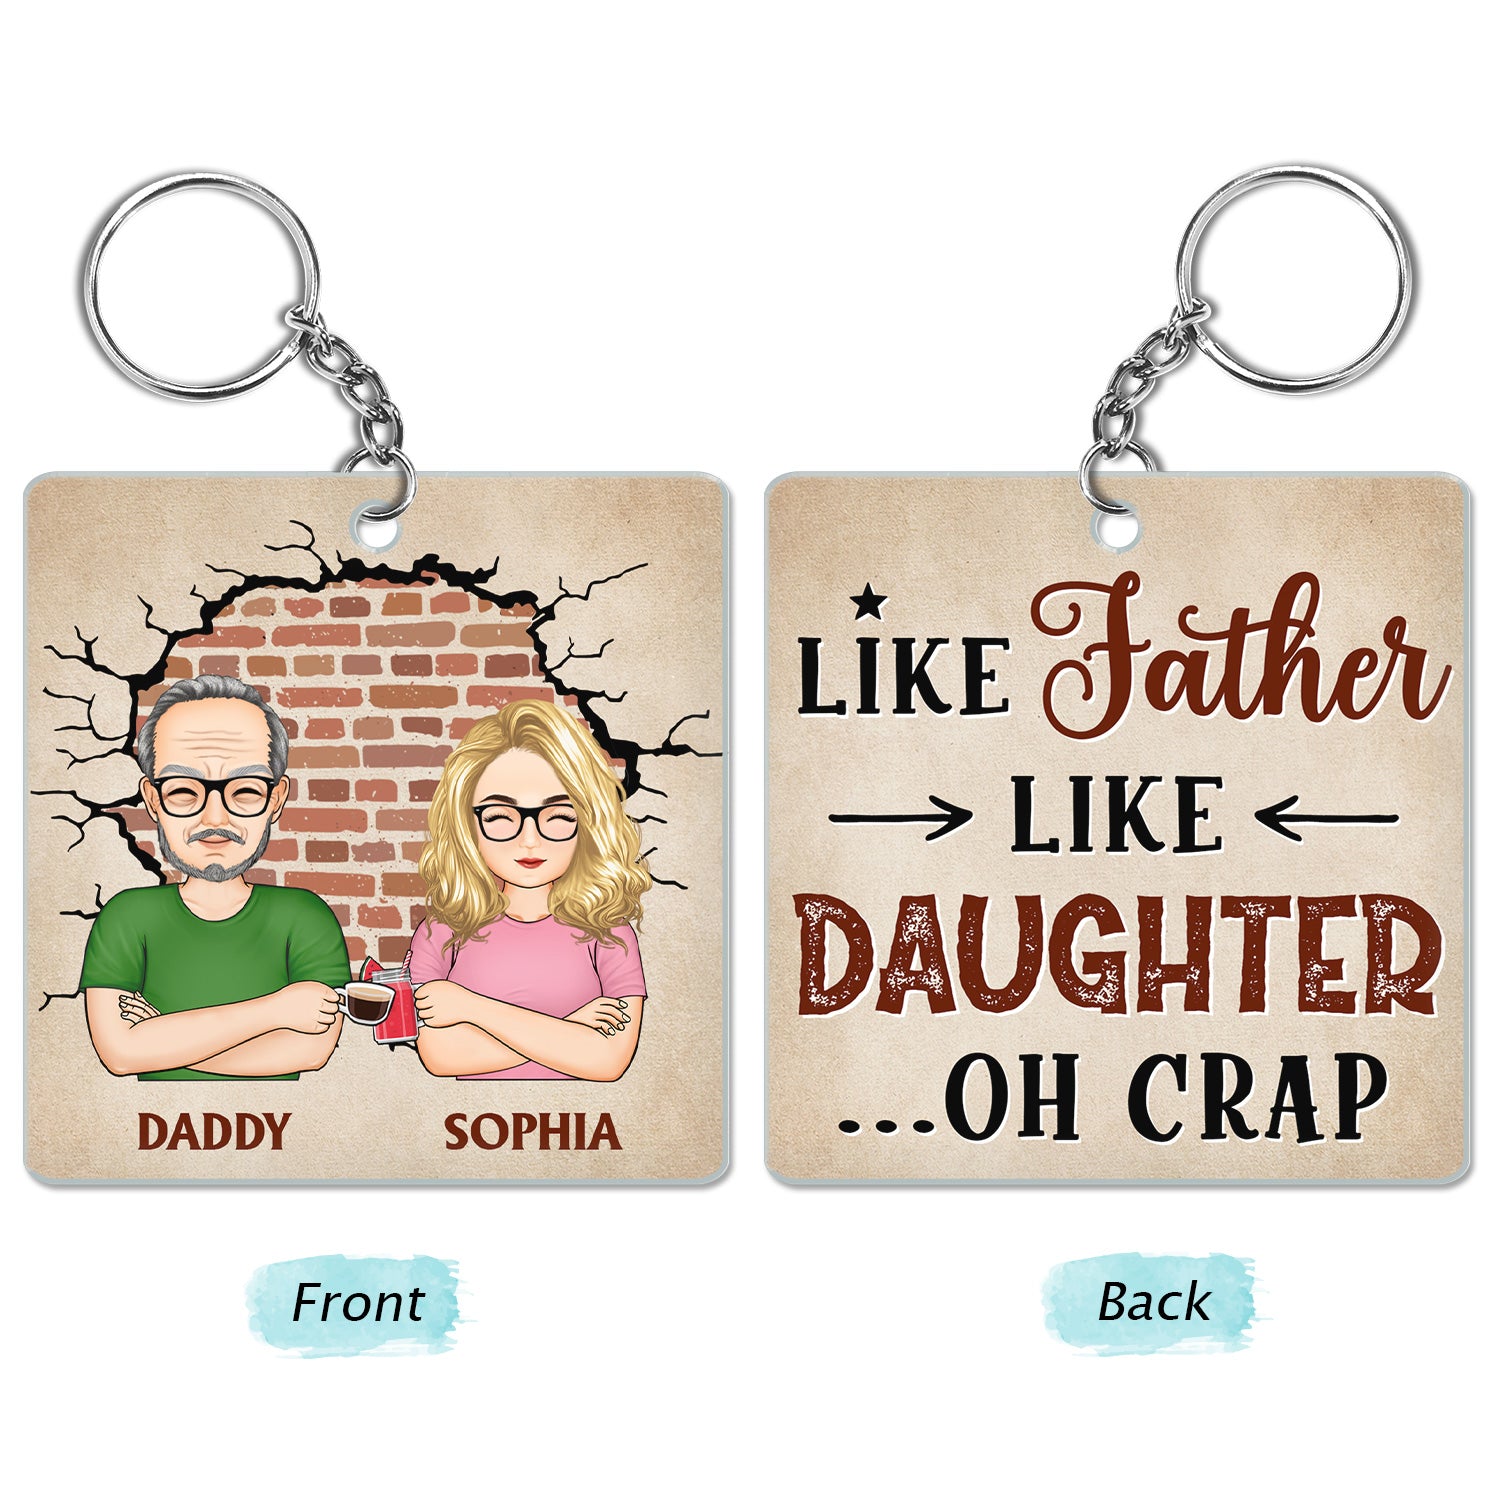 Like Father, Like Daughter - Birthday, Loving Gift For Dad, Father, Papa, Grandpa, Grandfather - Personalized Custom Acrylic Keychain